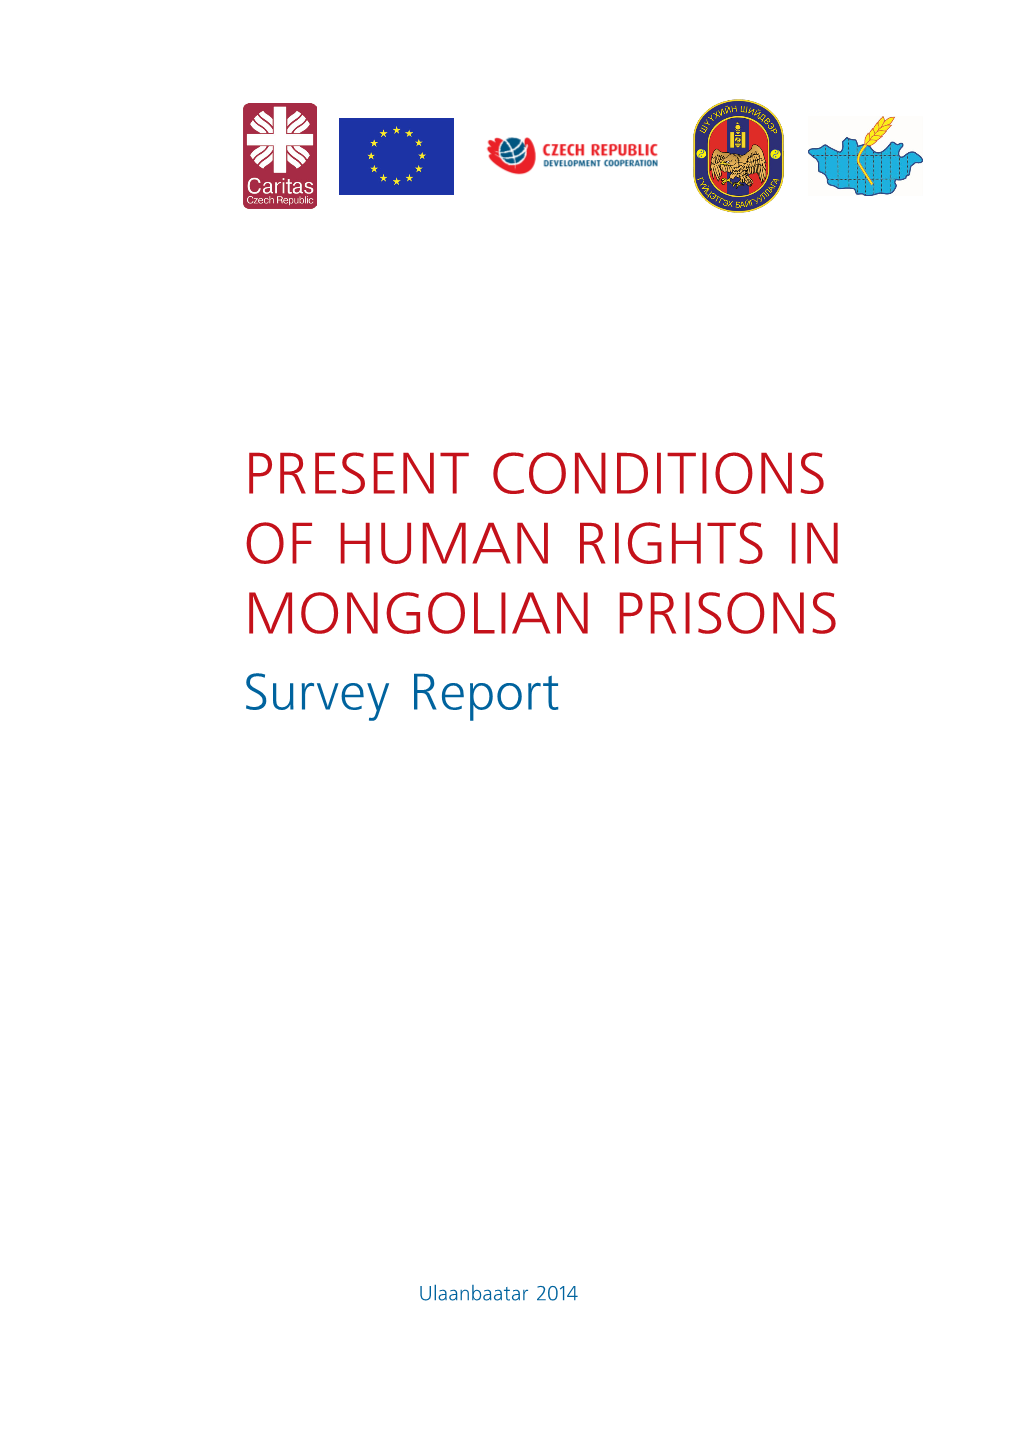 PRESENT CONDITIONS of HUMAN RIGHTS in MONGOLIAN PRISONS Survey Report